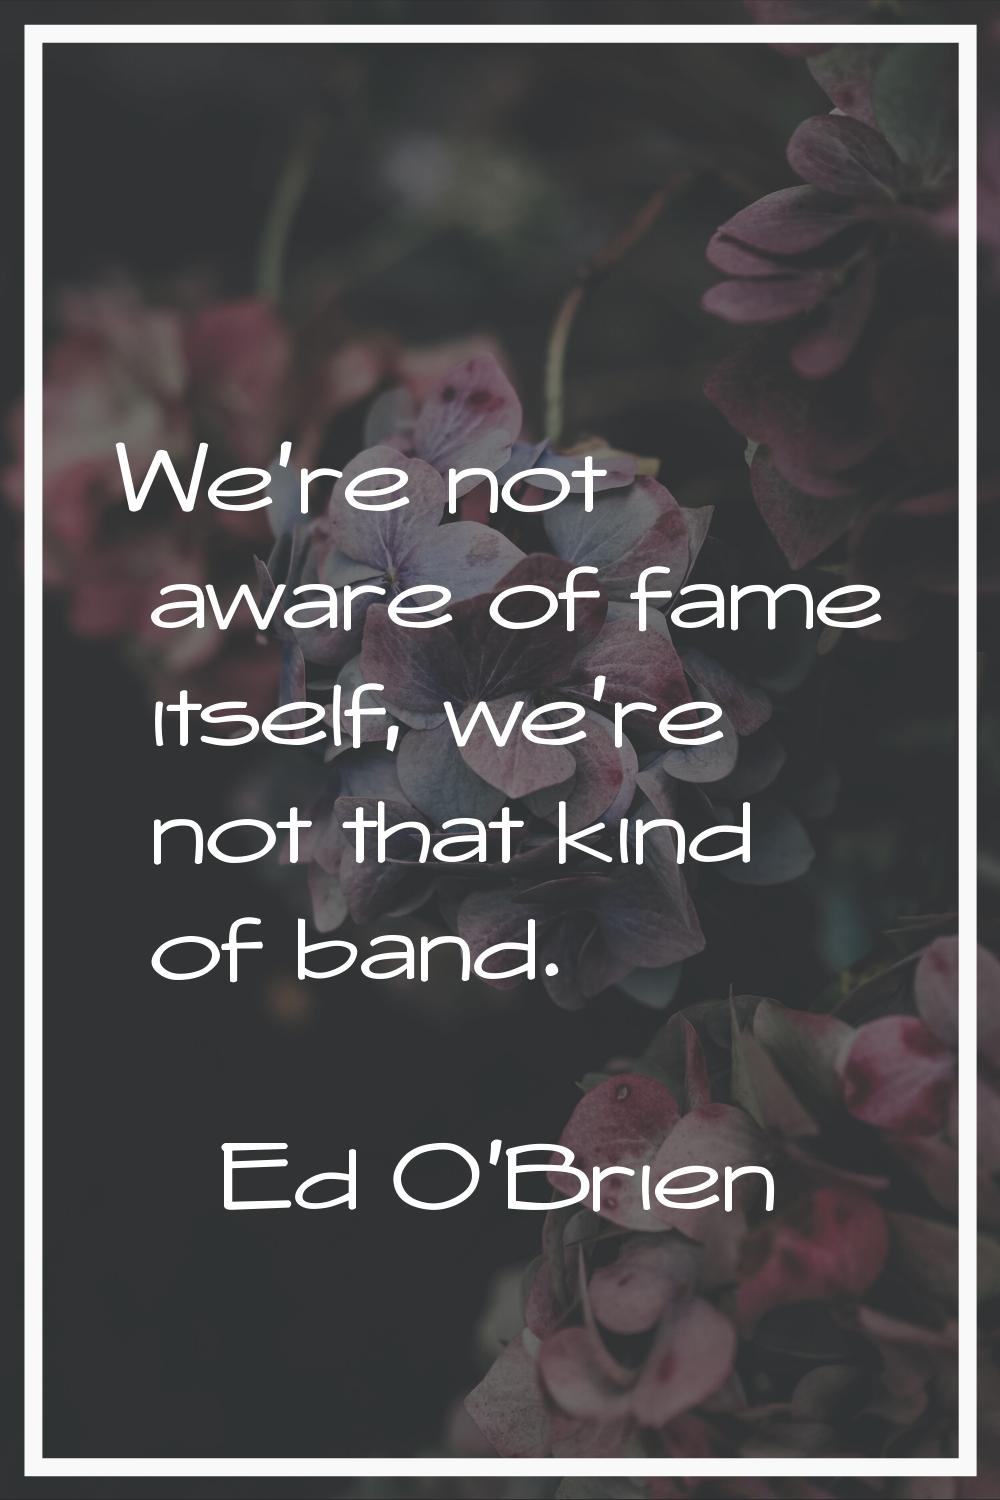 We're not aware of fame itself, we're not that kind of band.